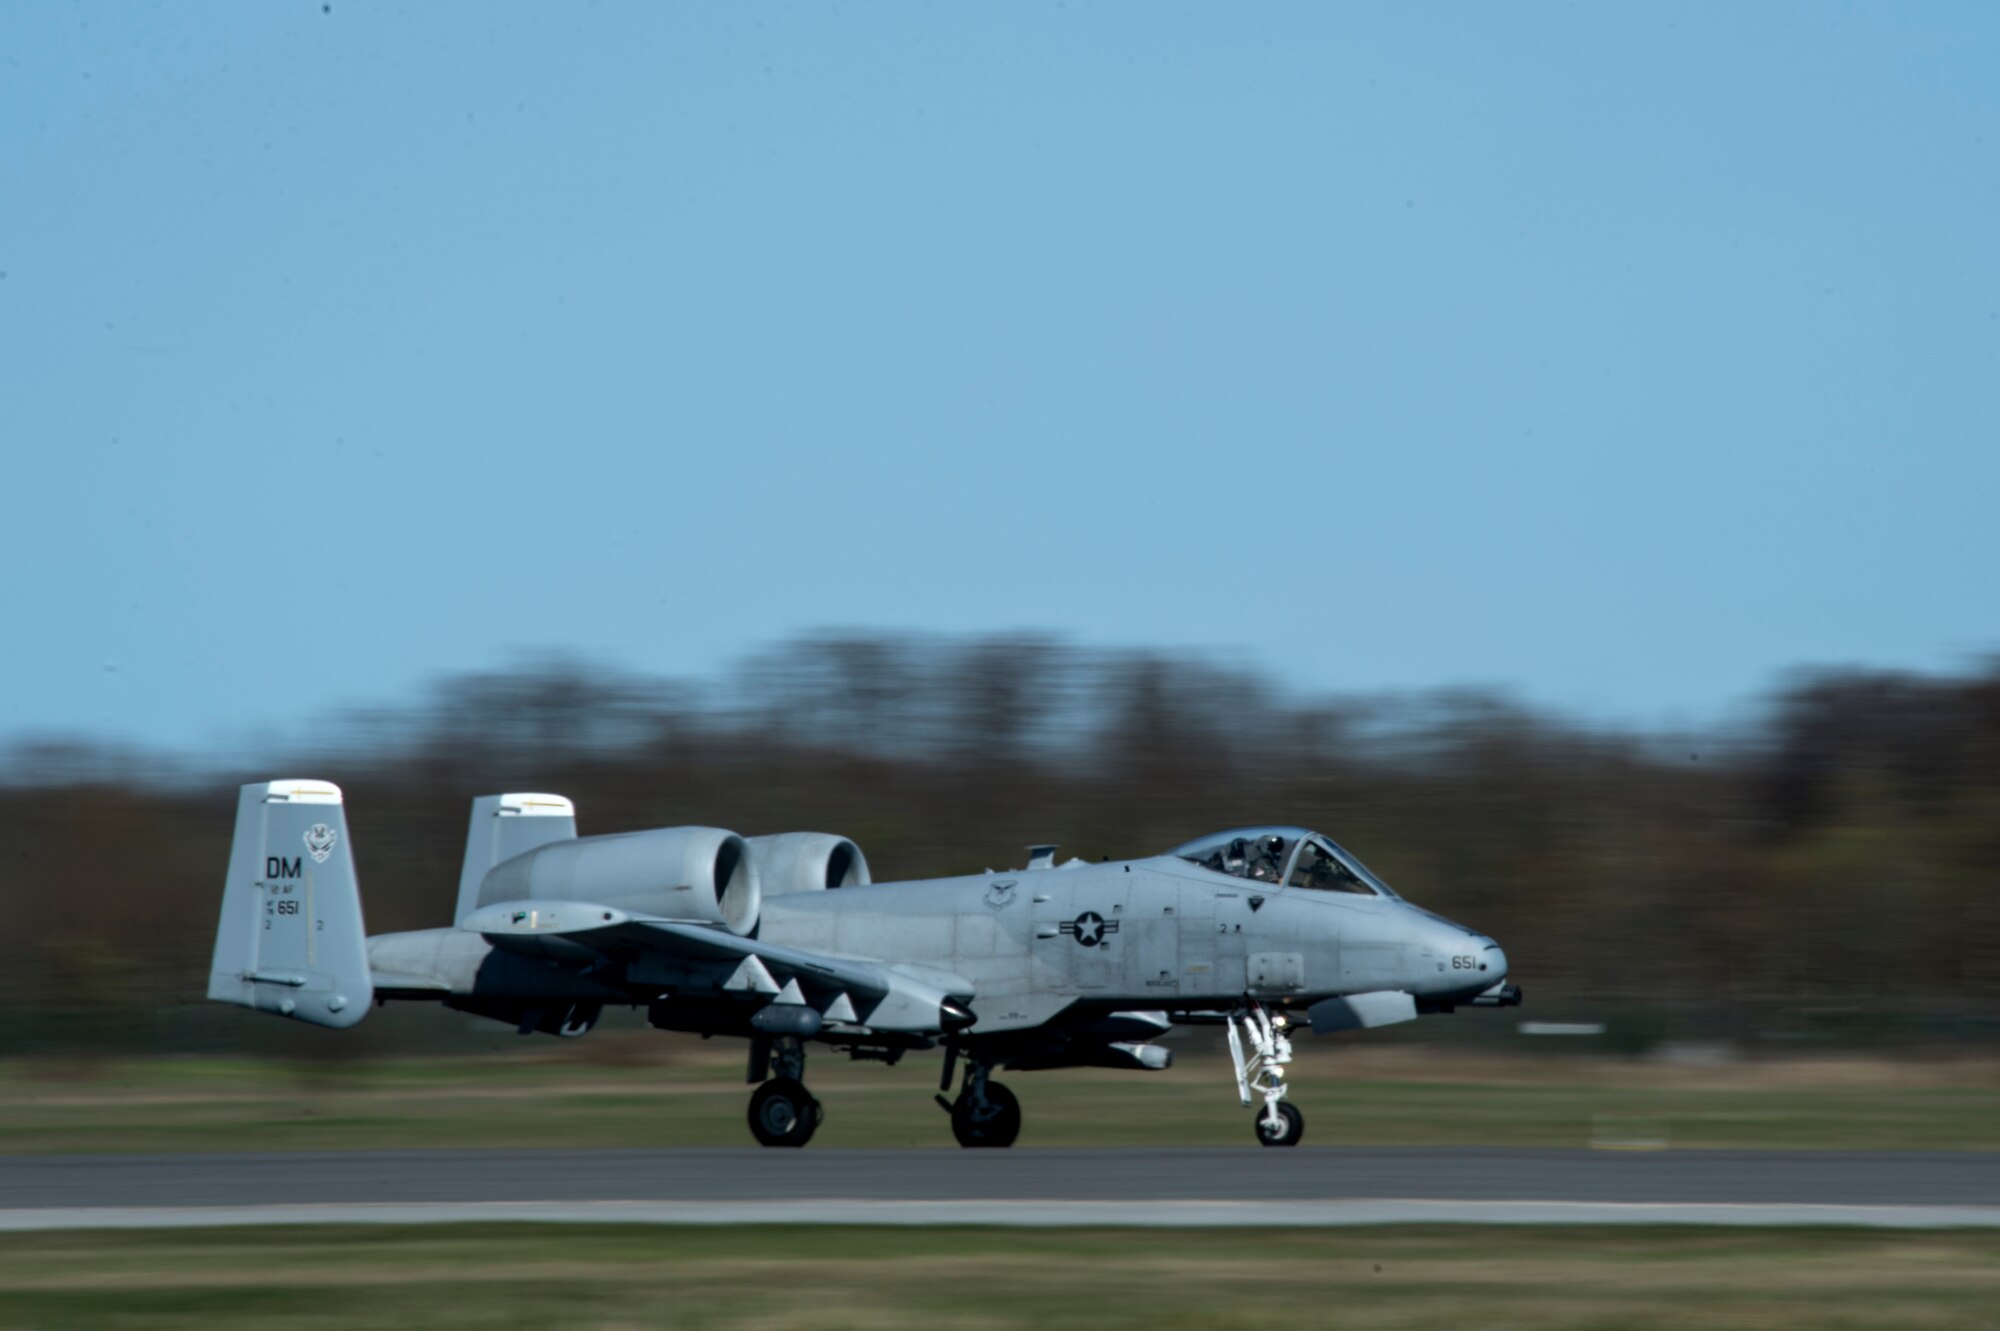 An A-10 Thunderbolt II attack aircraft takes off from Ämari Air Base, Estonia, May 4, 2015. The U.S. is committed to acting collectively with NATO Allies and the international community to address an security challenges. (U.S. Air Force photo by Senior Airman Rusty Frank/Released)